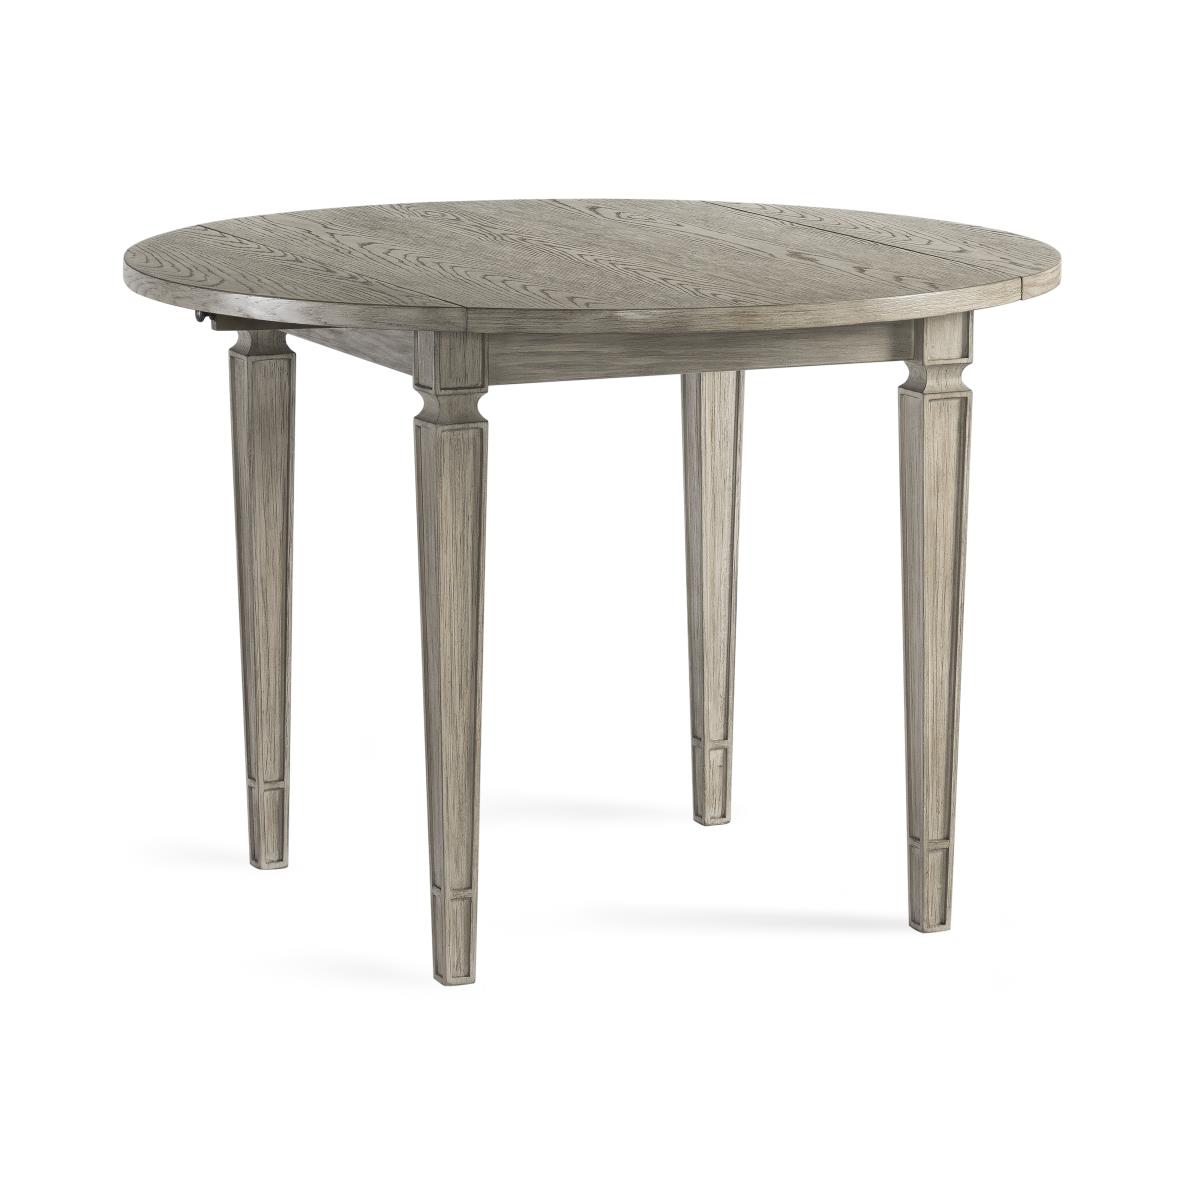 1153-dr-706 Bellamy Dropleaf Round Dining Table, Ash Grey - 42 X 30 In.